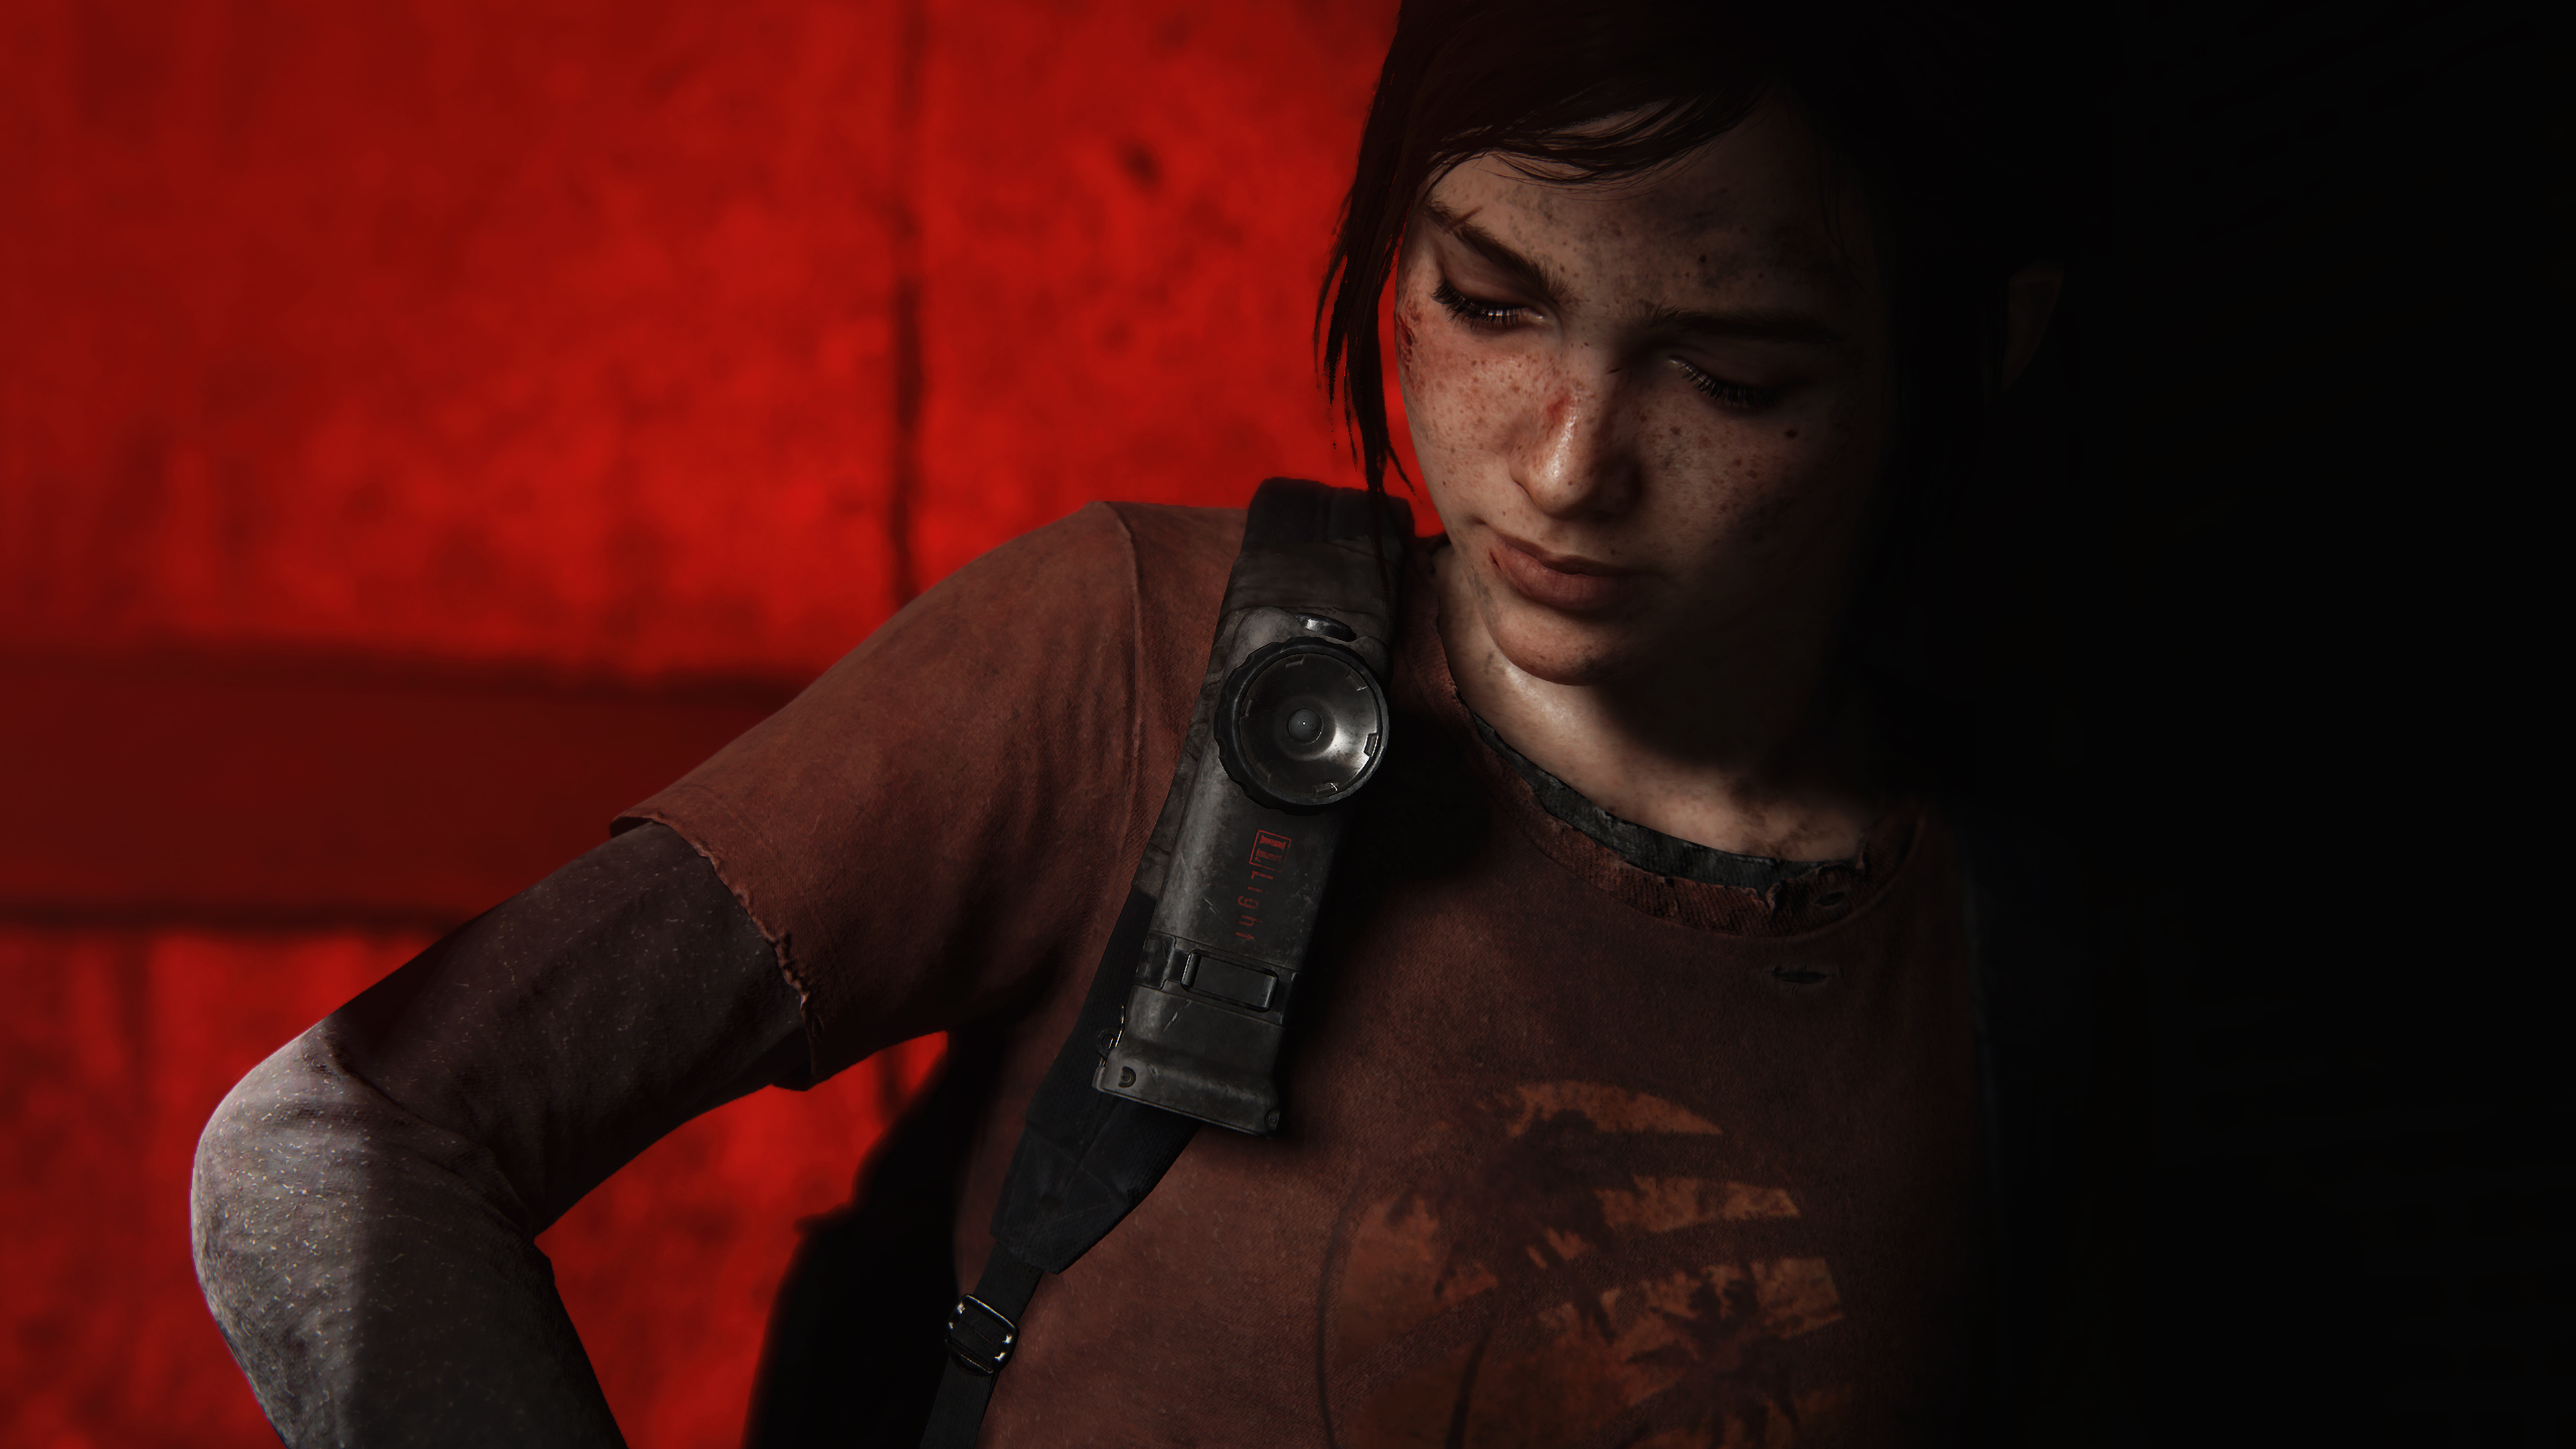 The Last of Us: Part 1 UltraWide 21:9 wallpapers or desktop backgrounds